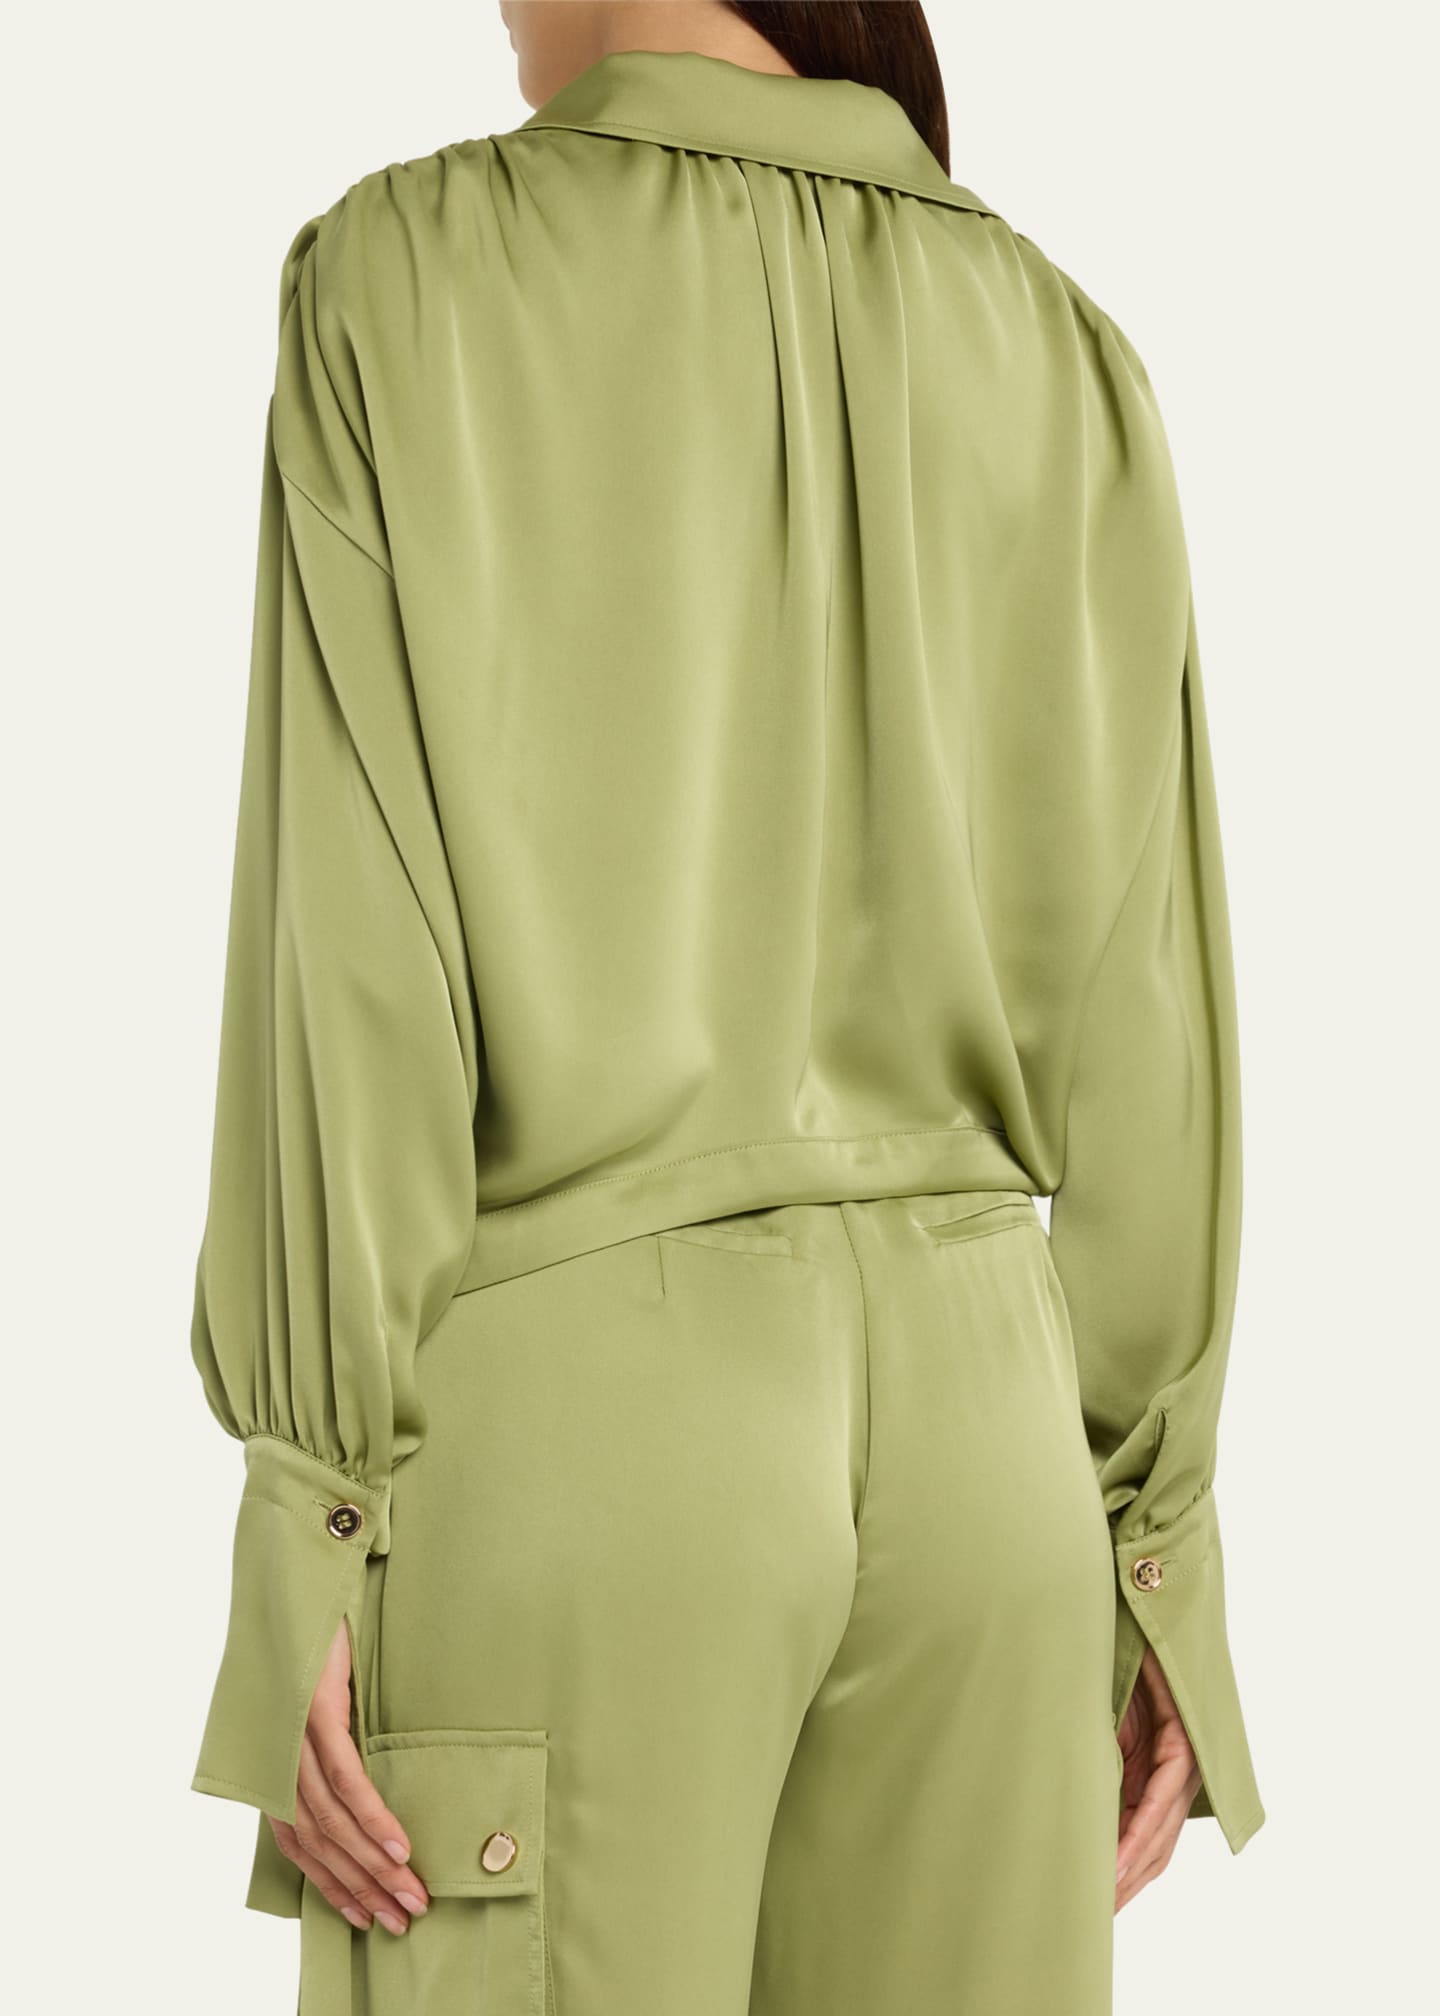 Ramy Brook Heidi Button-Front Cropped Blouse - Bergdorf Goodman